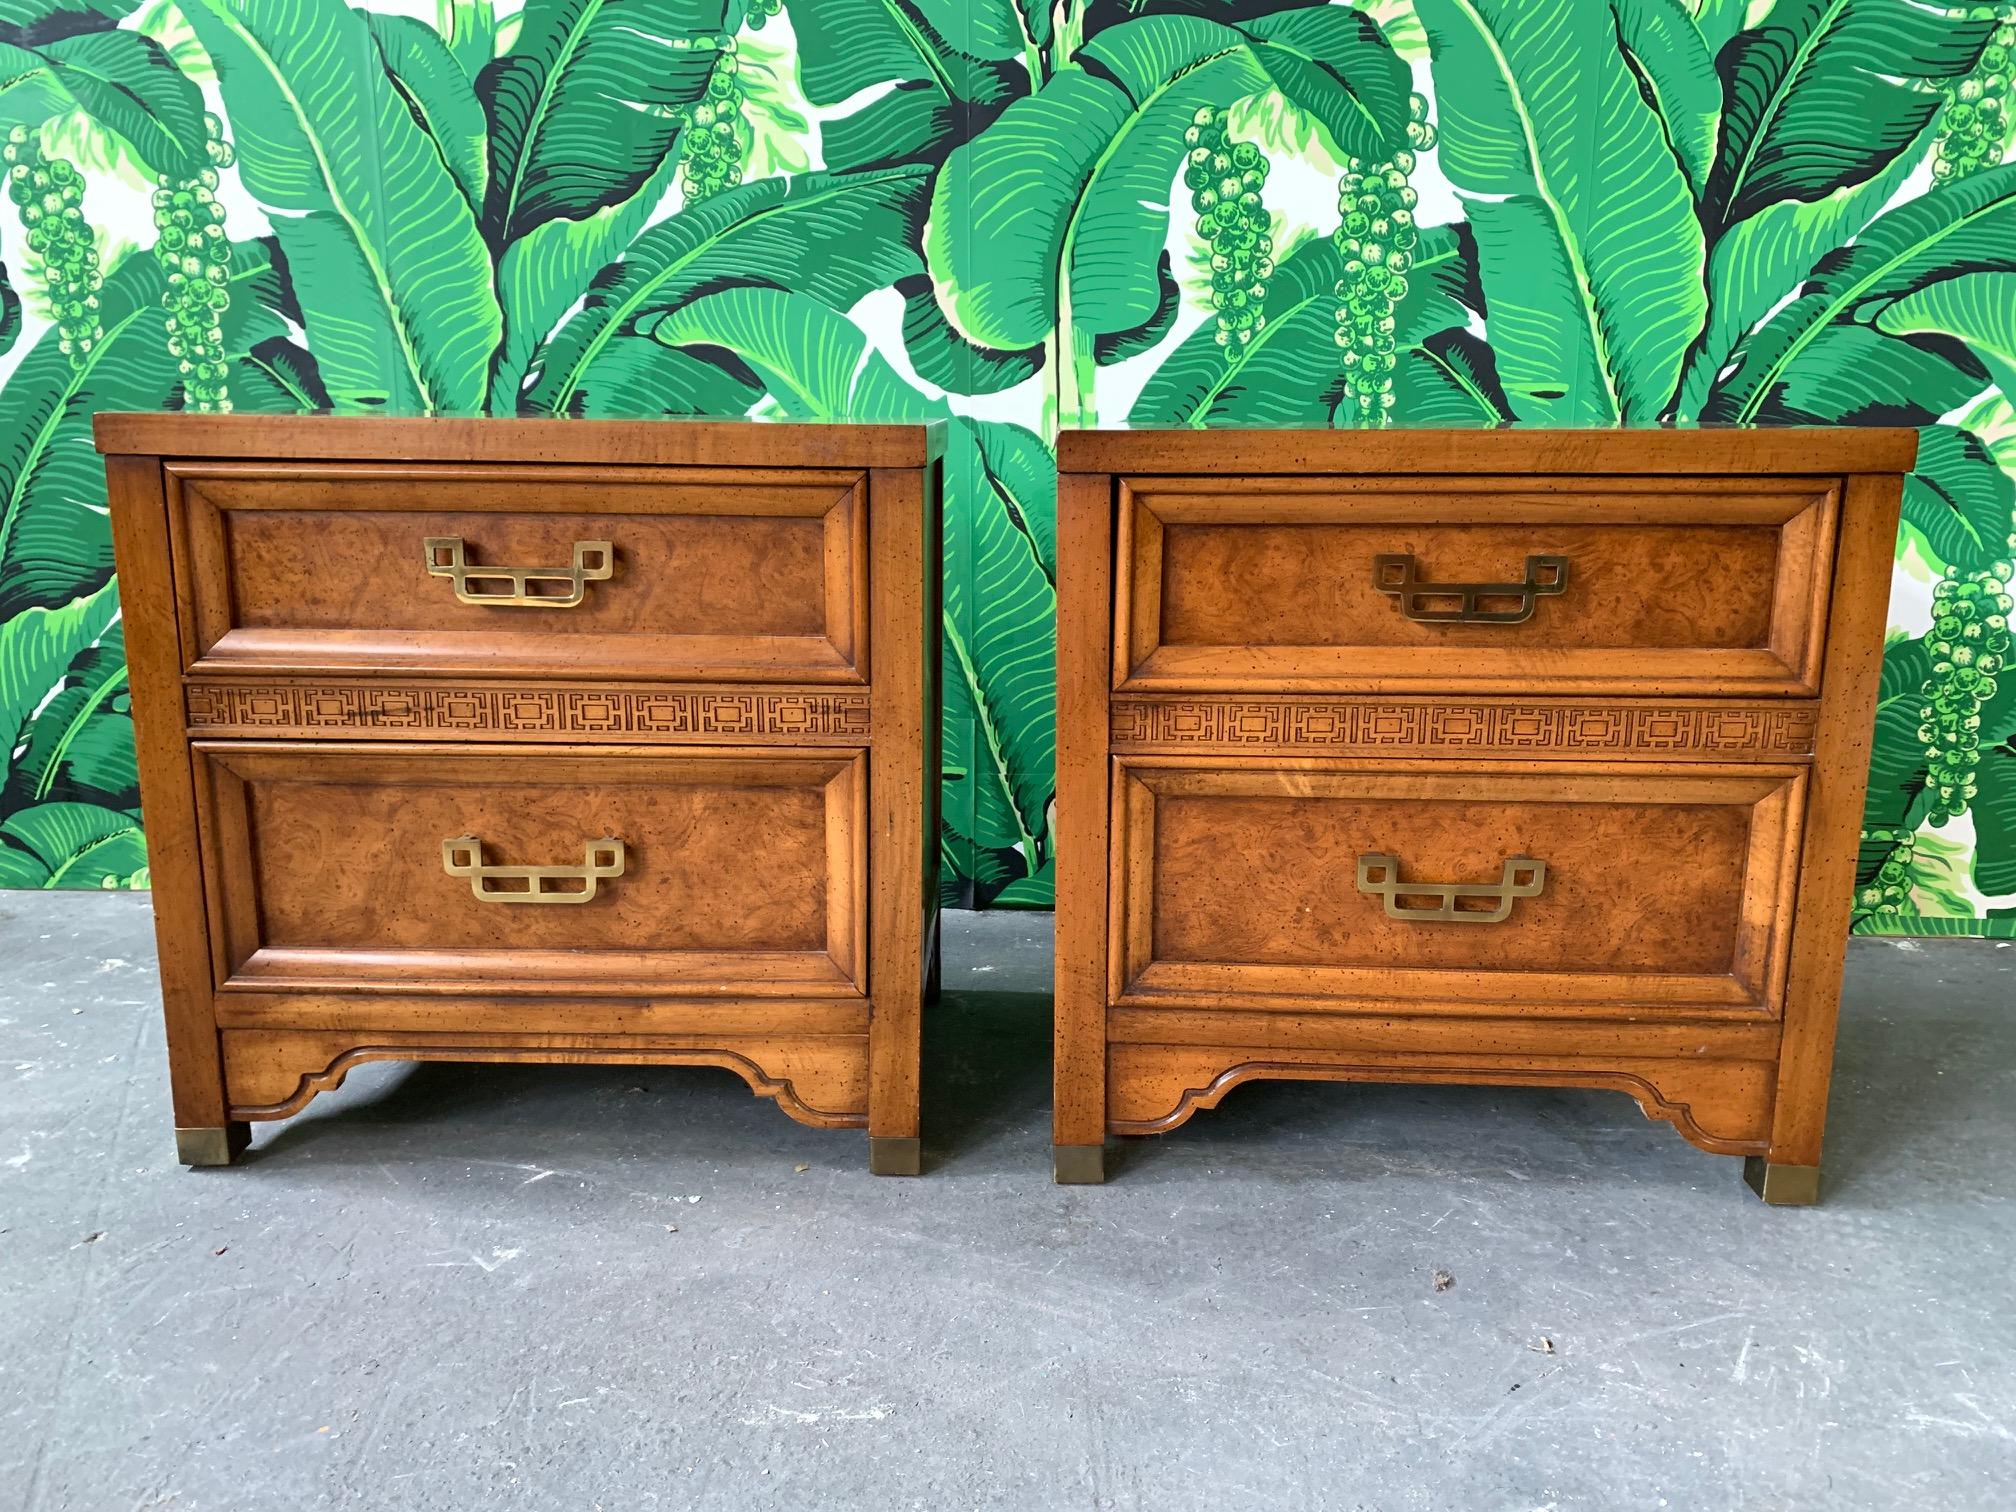 Pair of night stands by Henry Link from the Mandarin collection feature burl drawer faces and brass hardware. Very good vintage condition with only very minor signs of age appropriate wear.